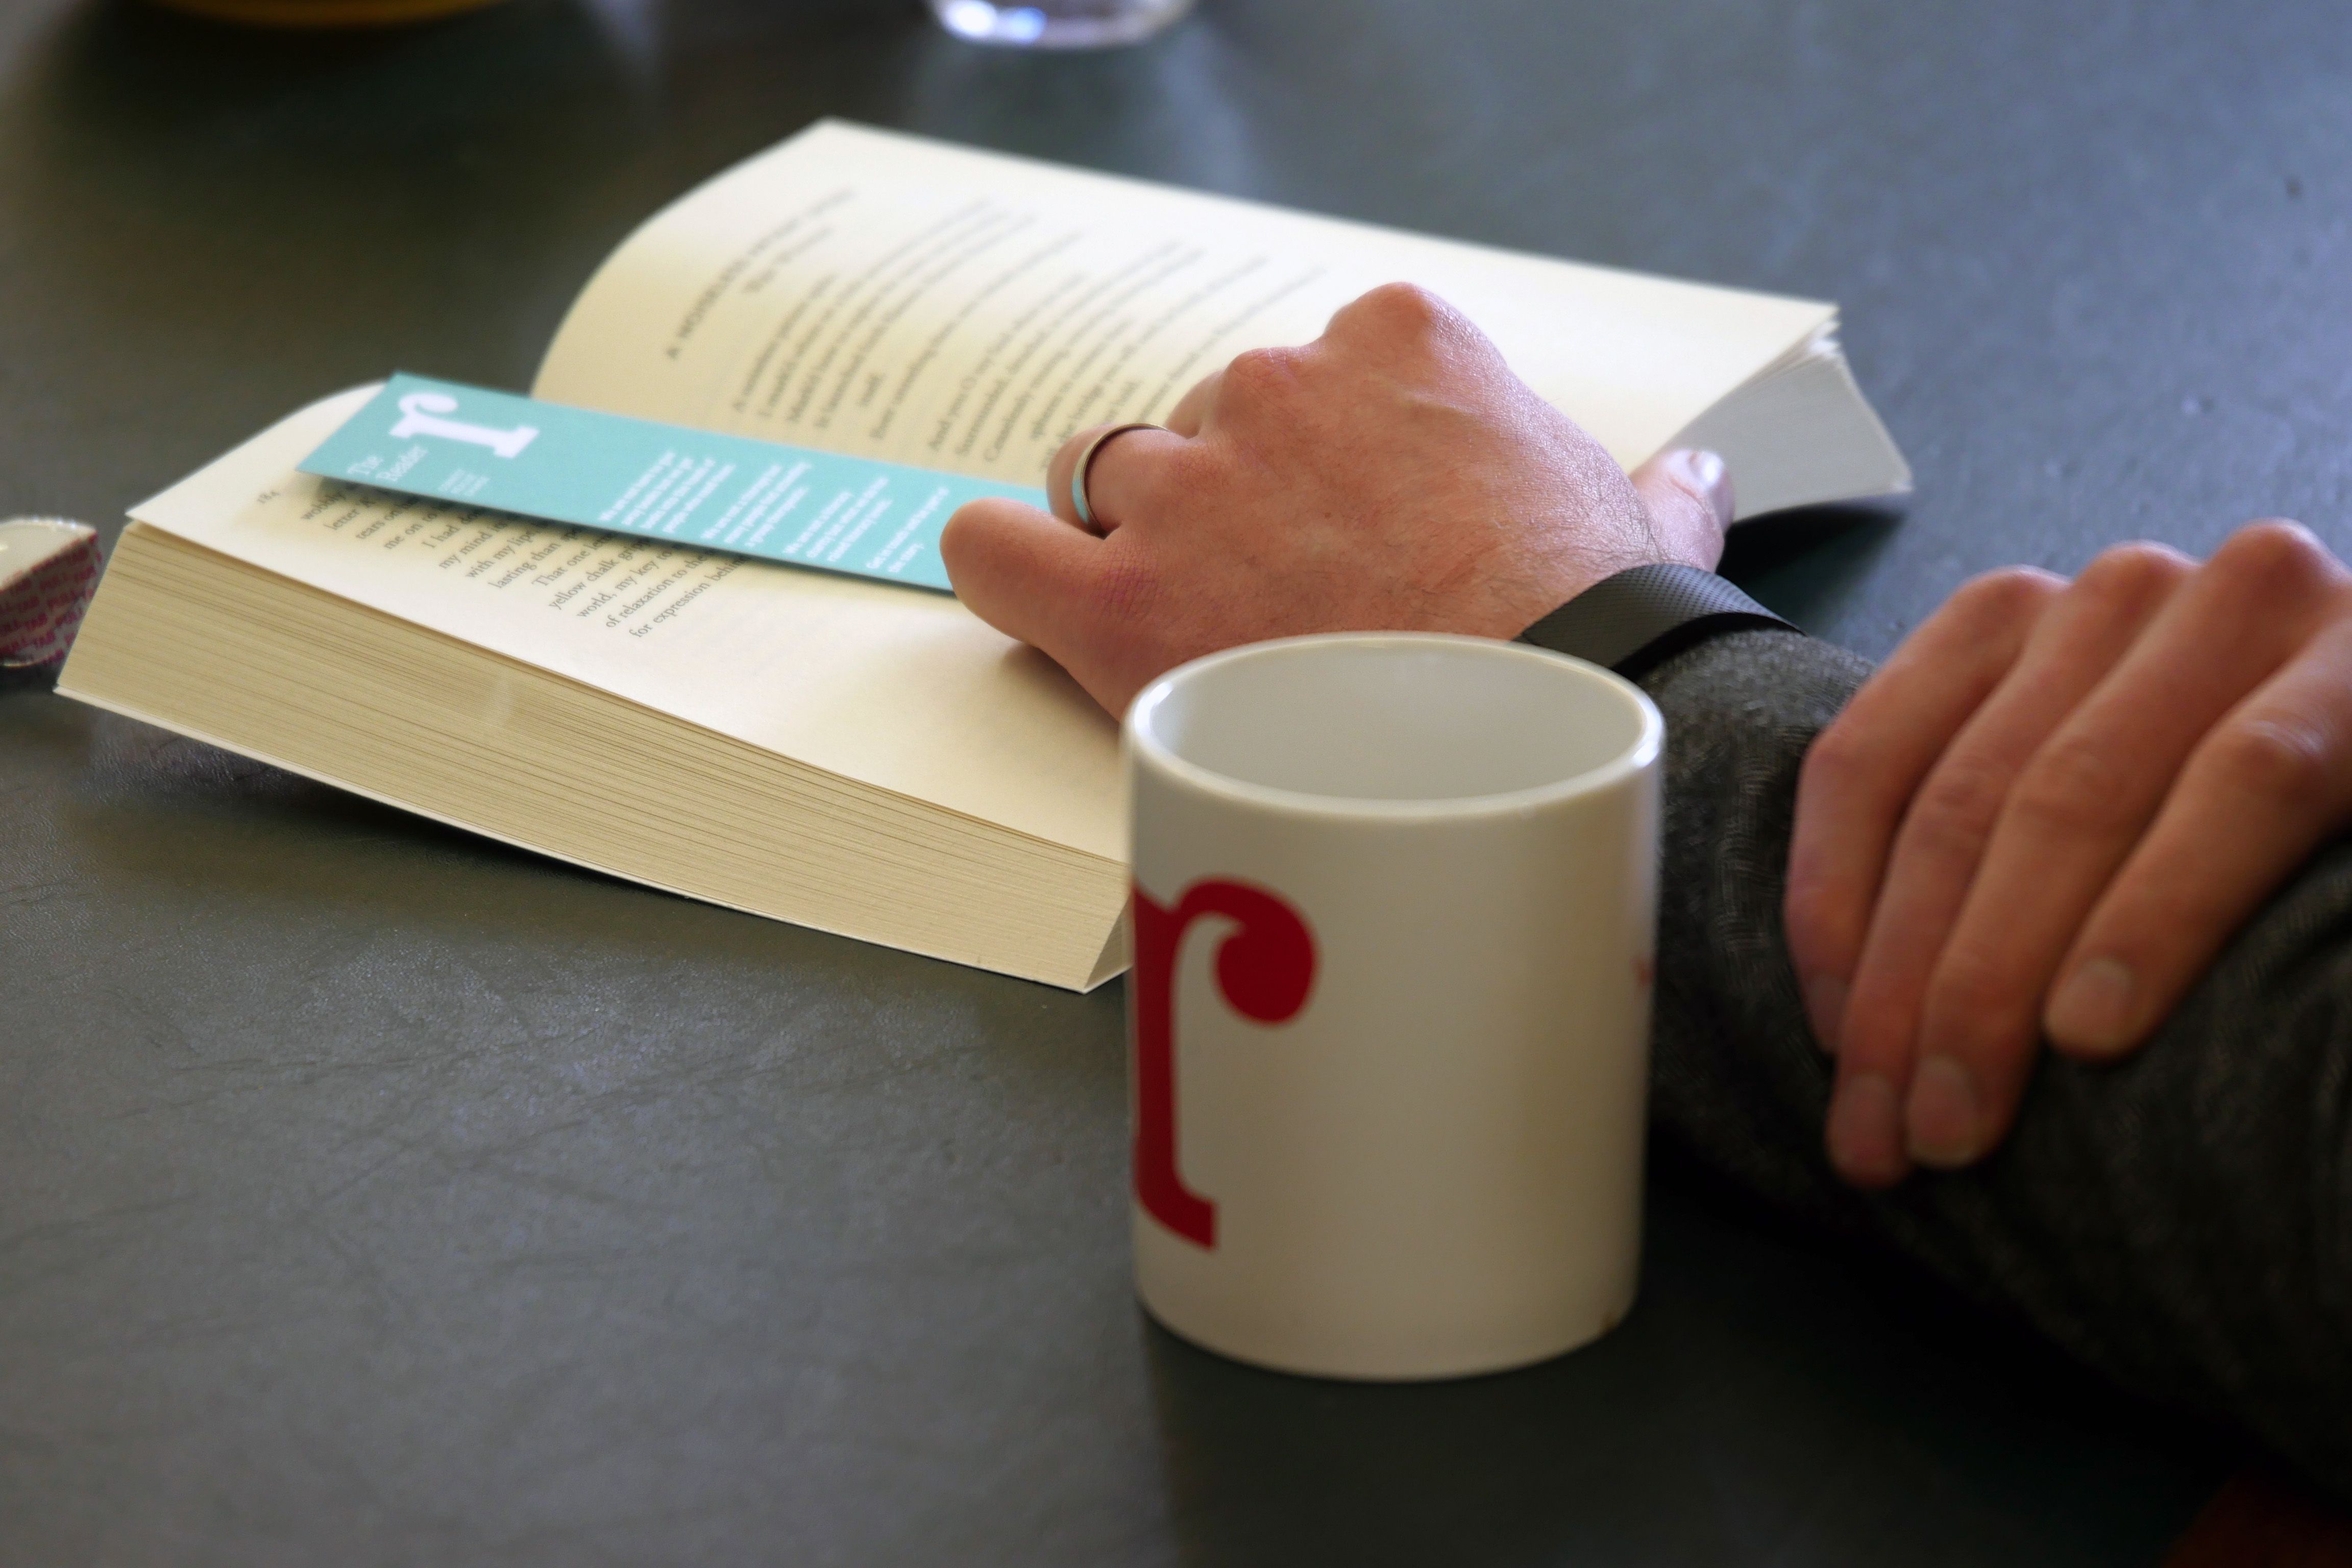 We love The Reader and take responsibility for it - an image of a hand in a book.